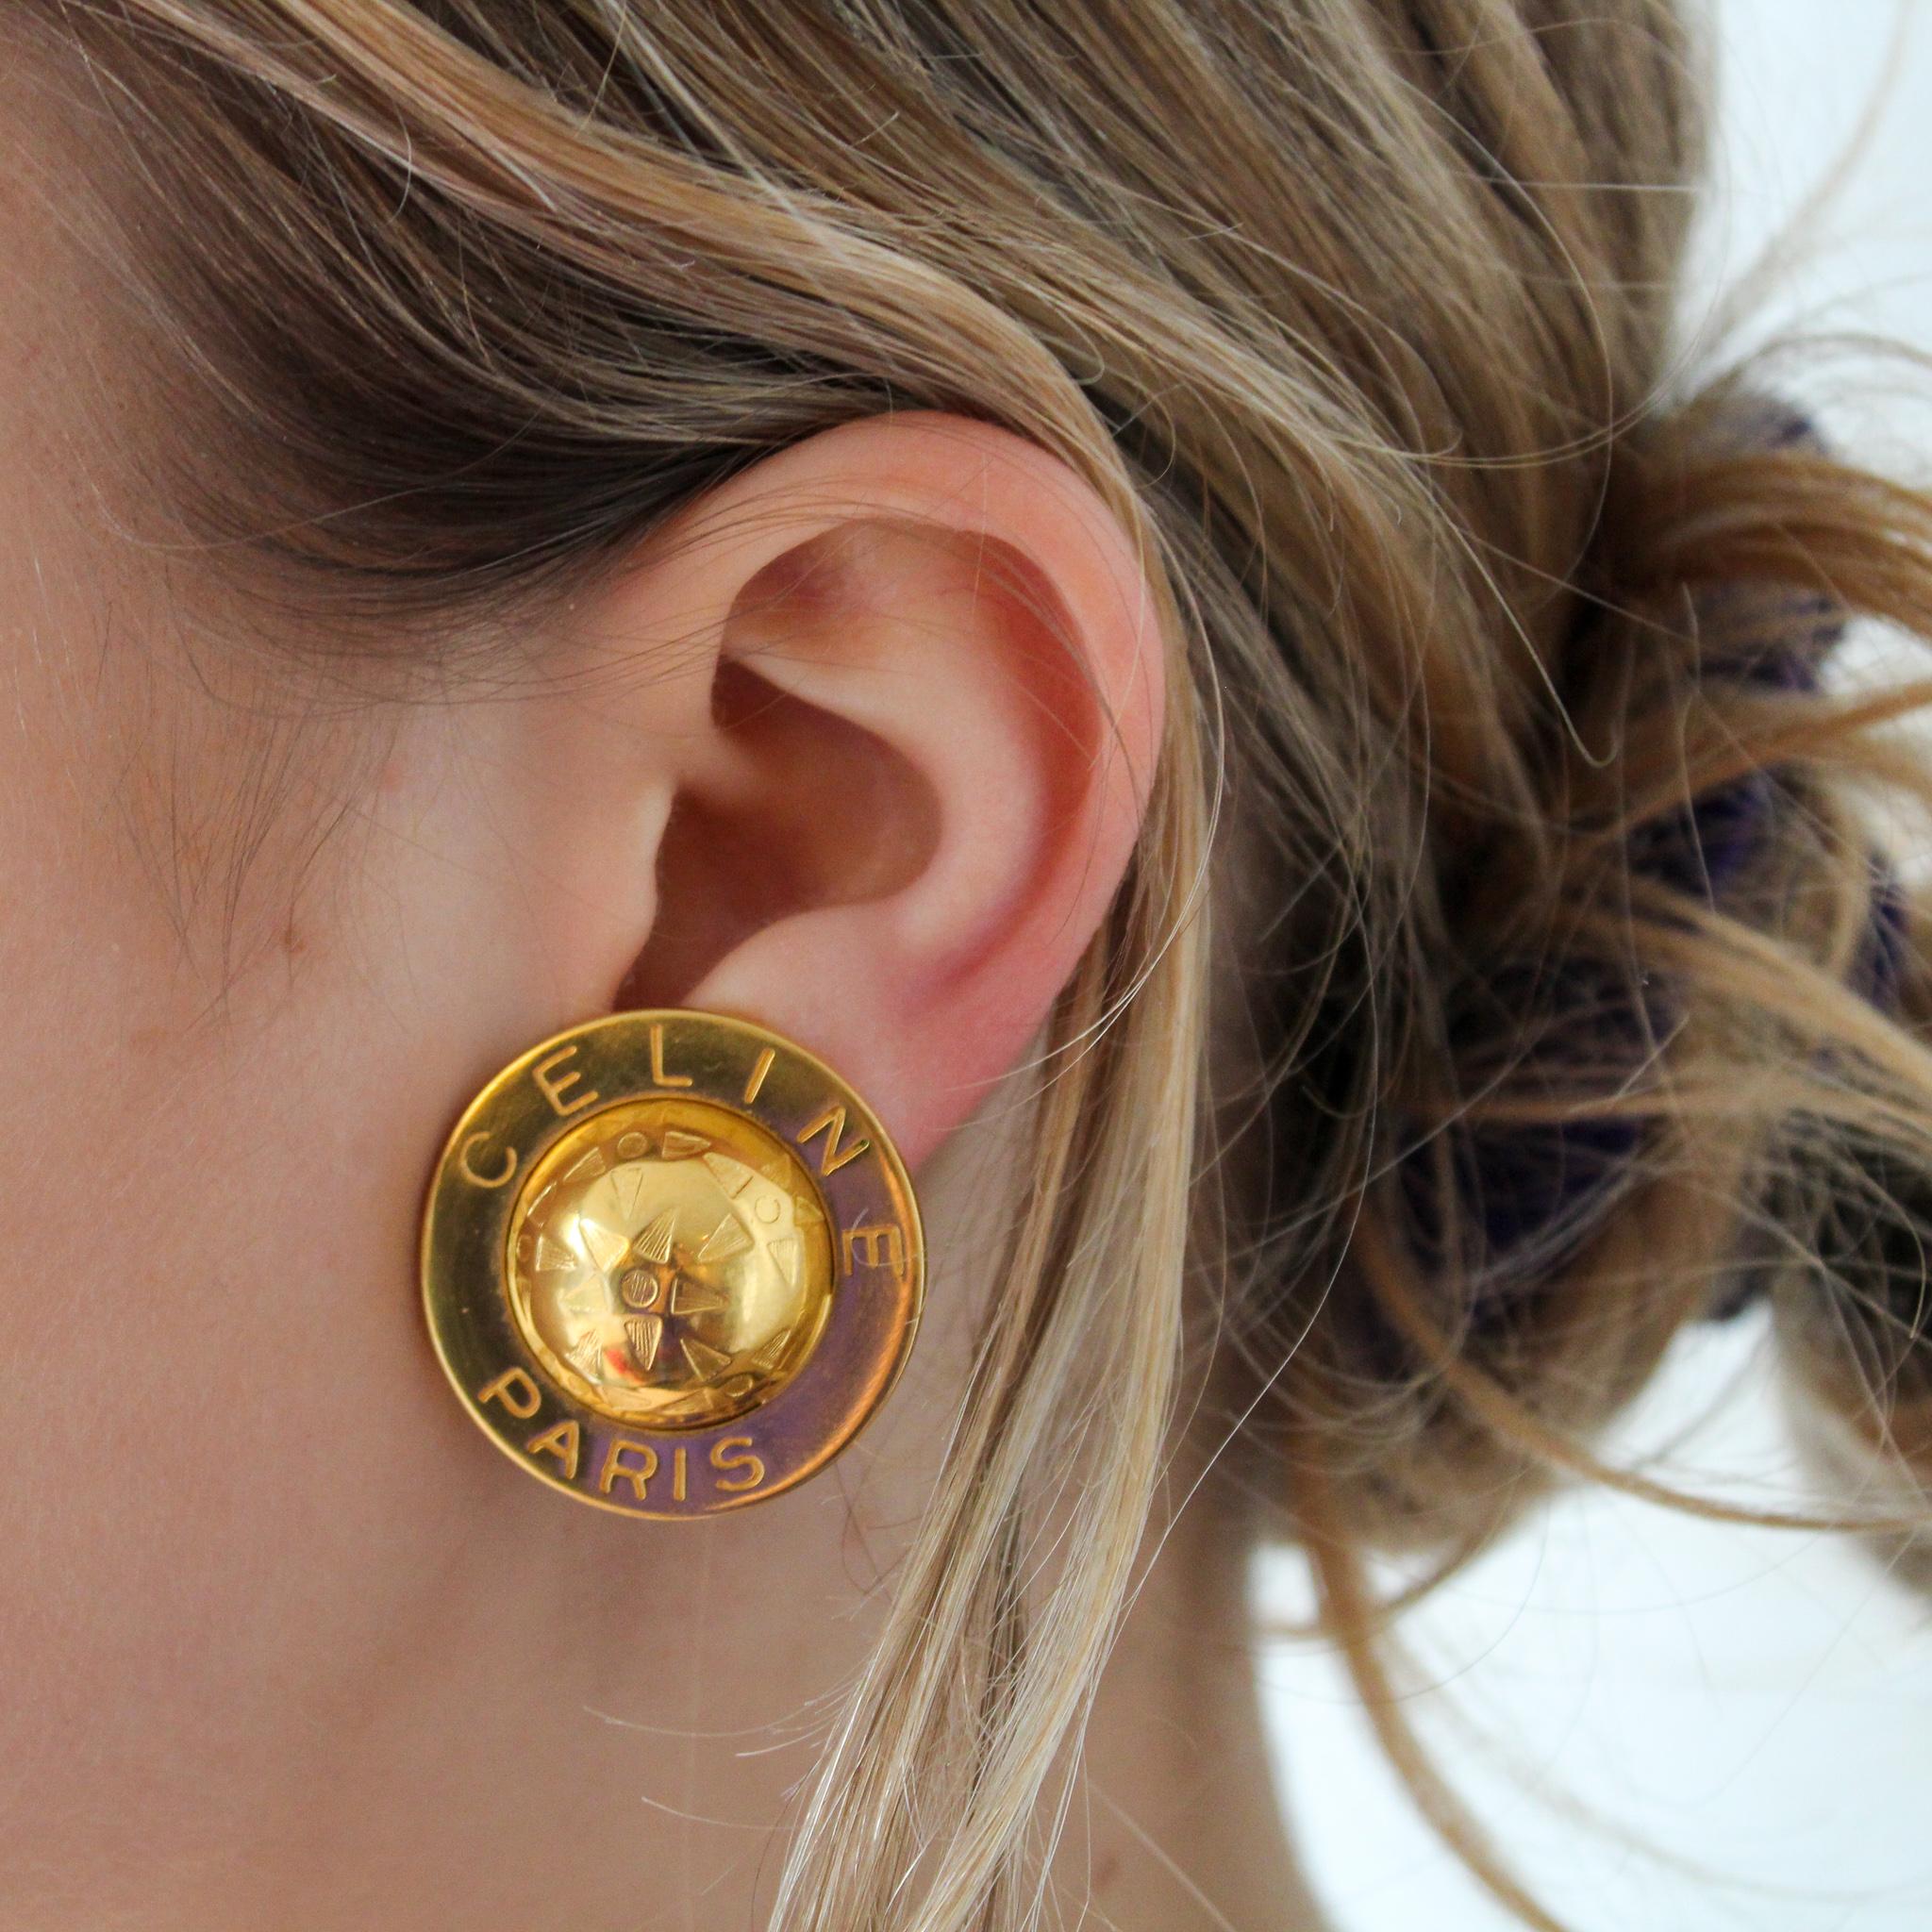 Celine Vintage 1990s Clip On Earrings

Iconic gold plated globe earrings from the 90s Celine archive  

Detail
-24ct gold plated
-Made in Italy in the 1990s
-Globe design surrounded by the Celine logo

Size & Fit
-Measure approx 1.2 inches across